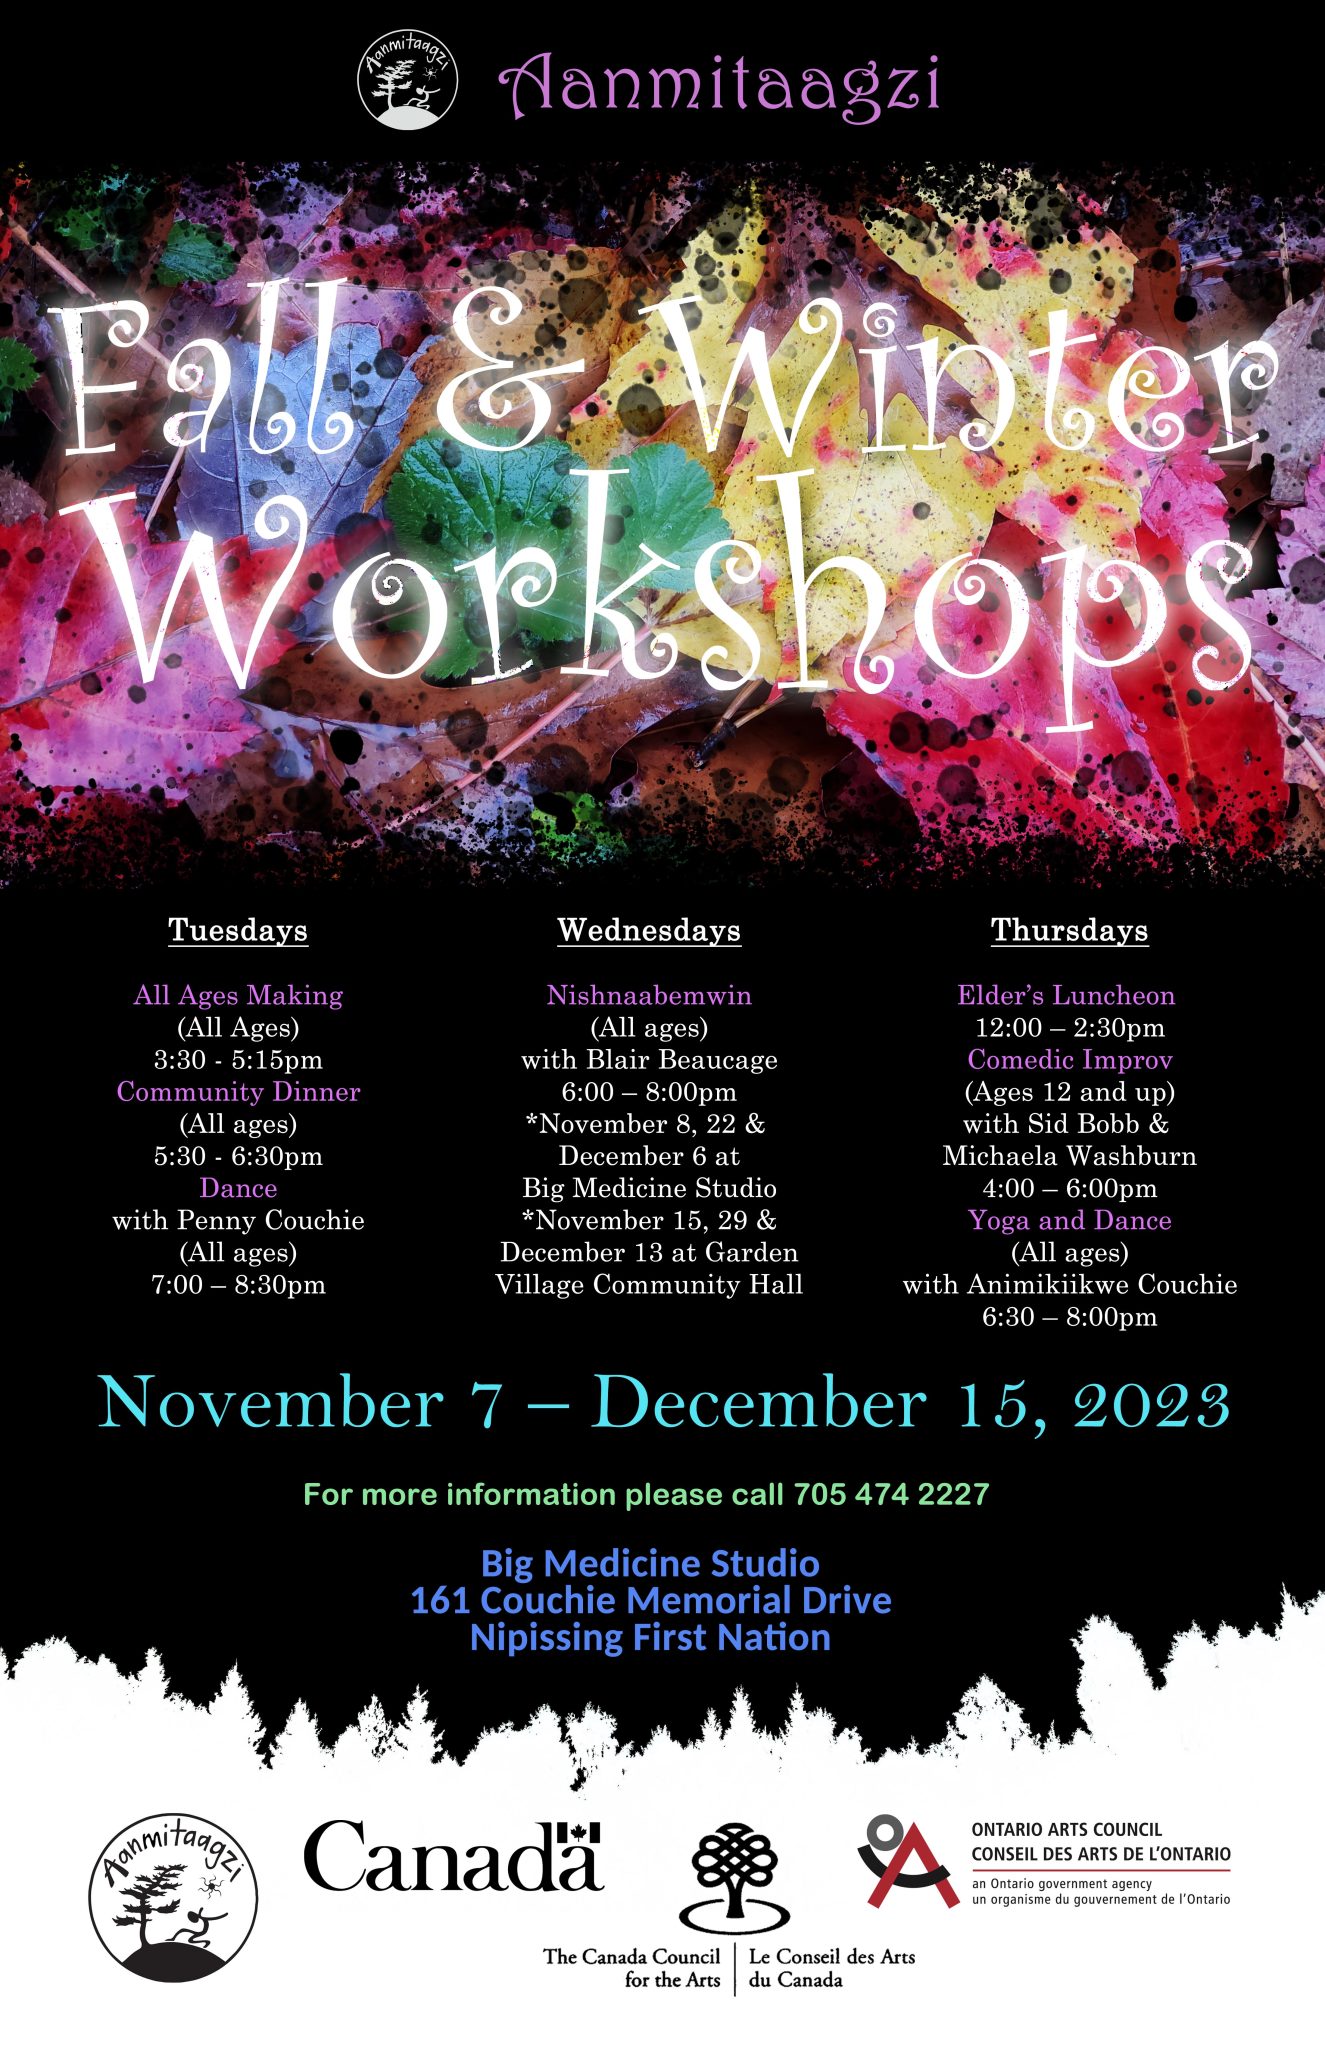 The poster for the 2023 fall and winter workshop series.